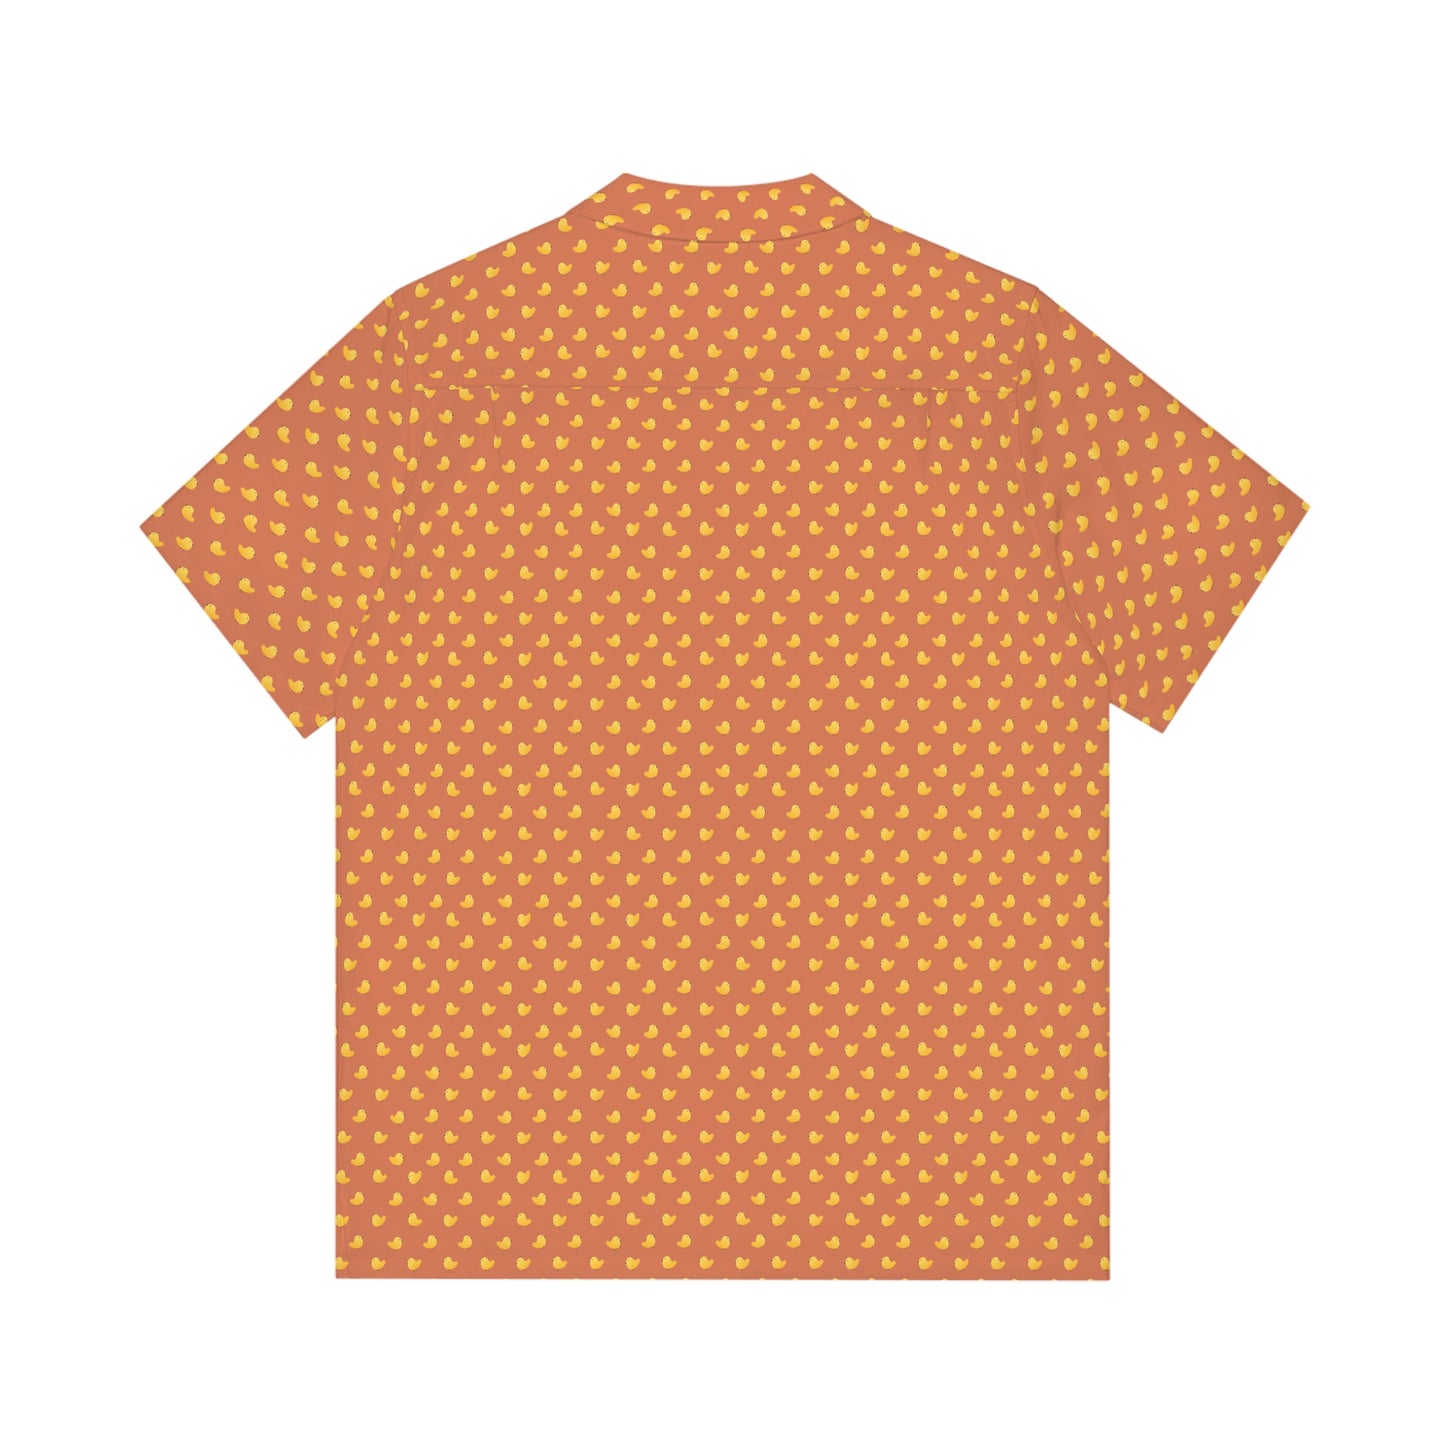 Li'l Chicky - Carry On Crow Clothing Co. - vibrant orange shirt with cute cartoon chick pattern - all over bird print shirt - back - comfortable summer shirt